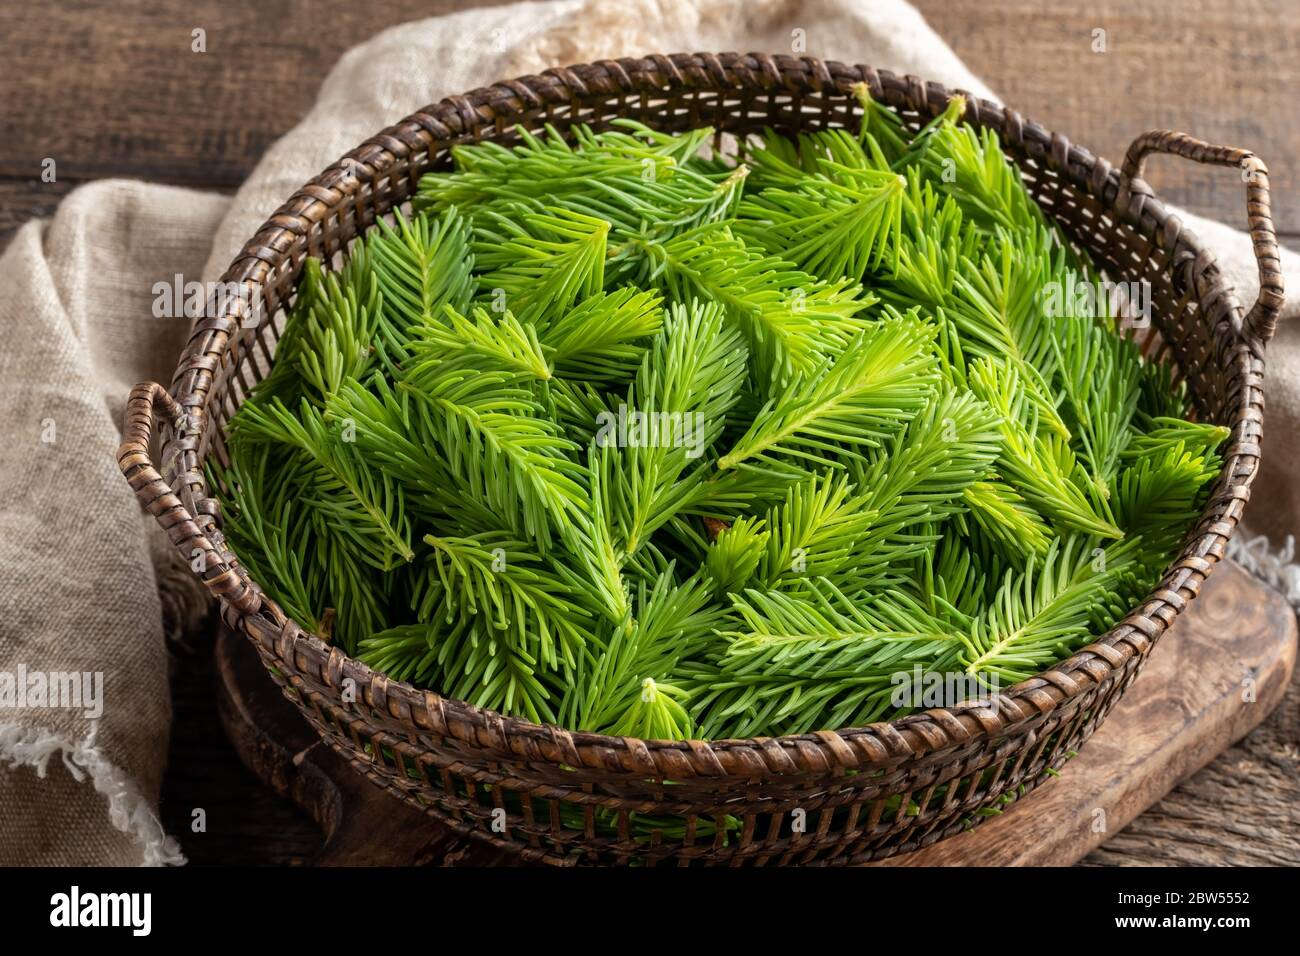 Young spruce tips in a basket, collected to prepare herbal syrup Stock Photo